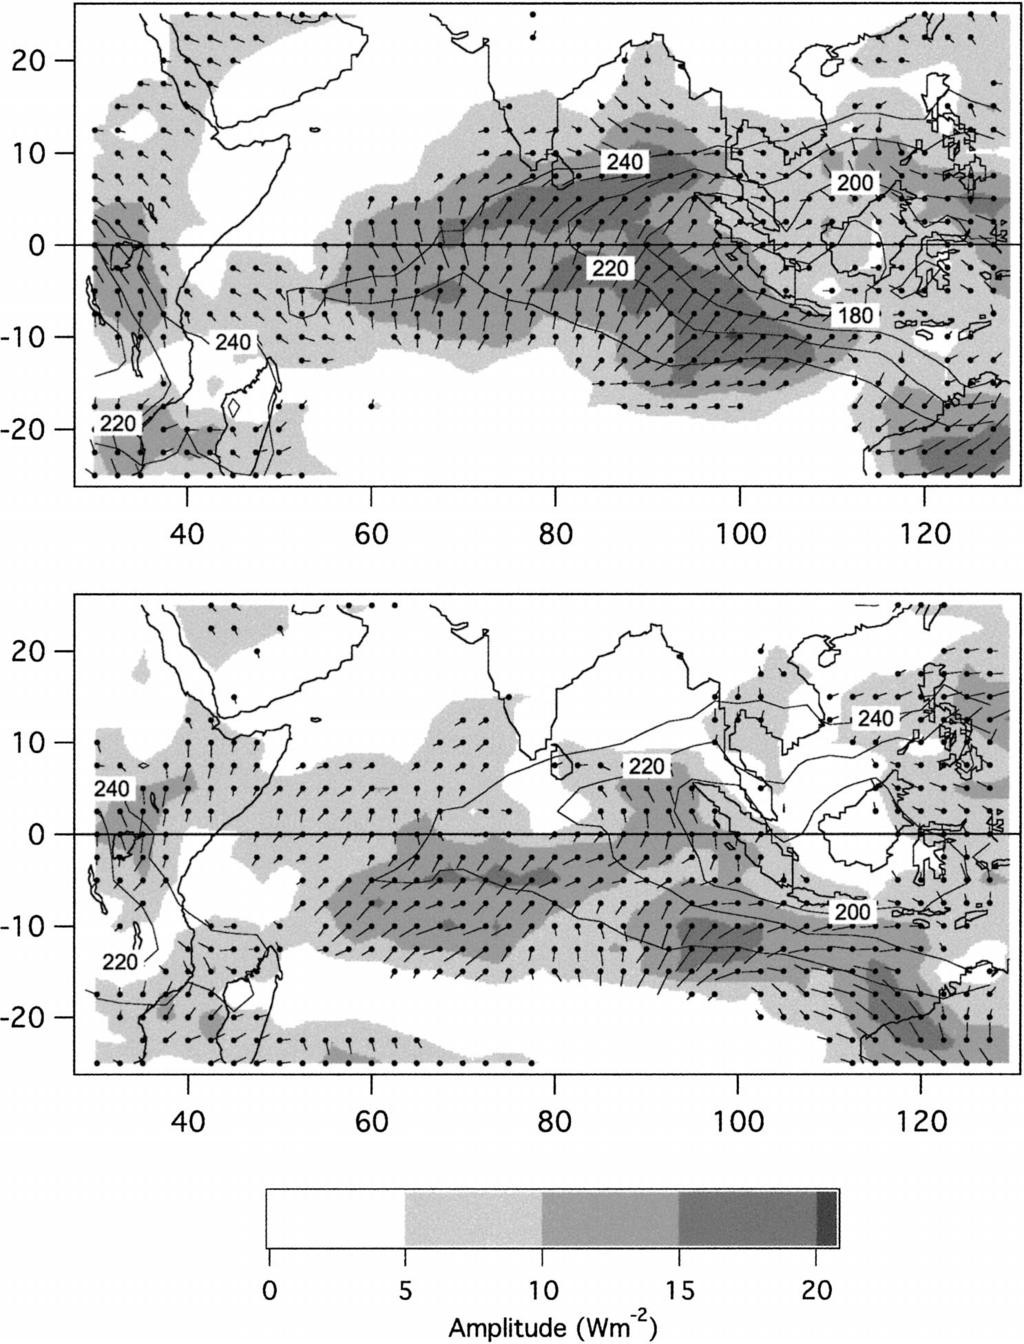 1010 JOURNAL OF THE ATMOSPHERIC SCIENCES VOLUME 61 FIG. 3. Amplitude (A x ) and phase ( x ) of the two events extracted from a local mode analysis for JFM 1999.